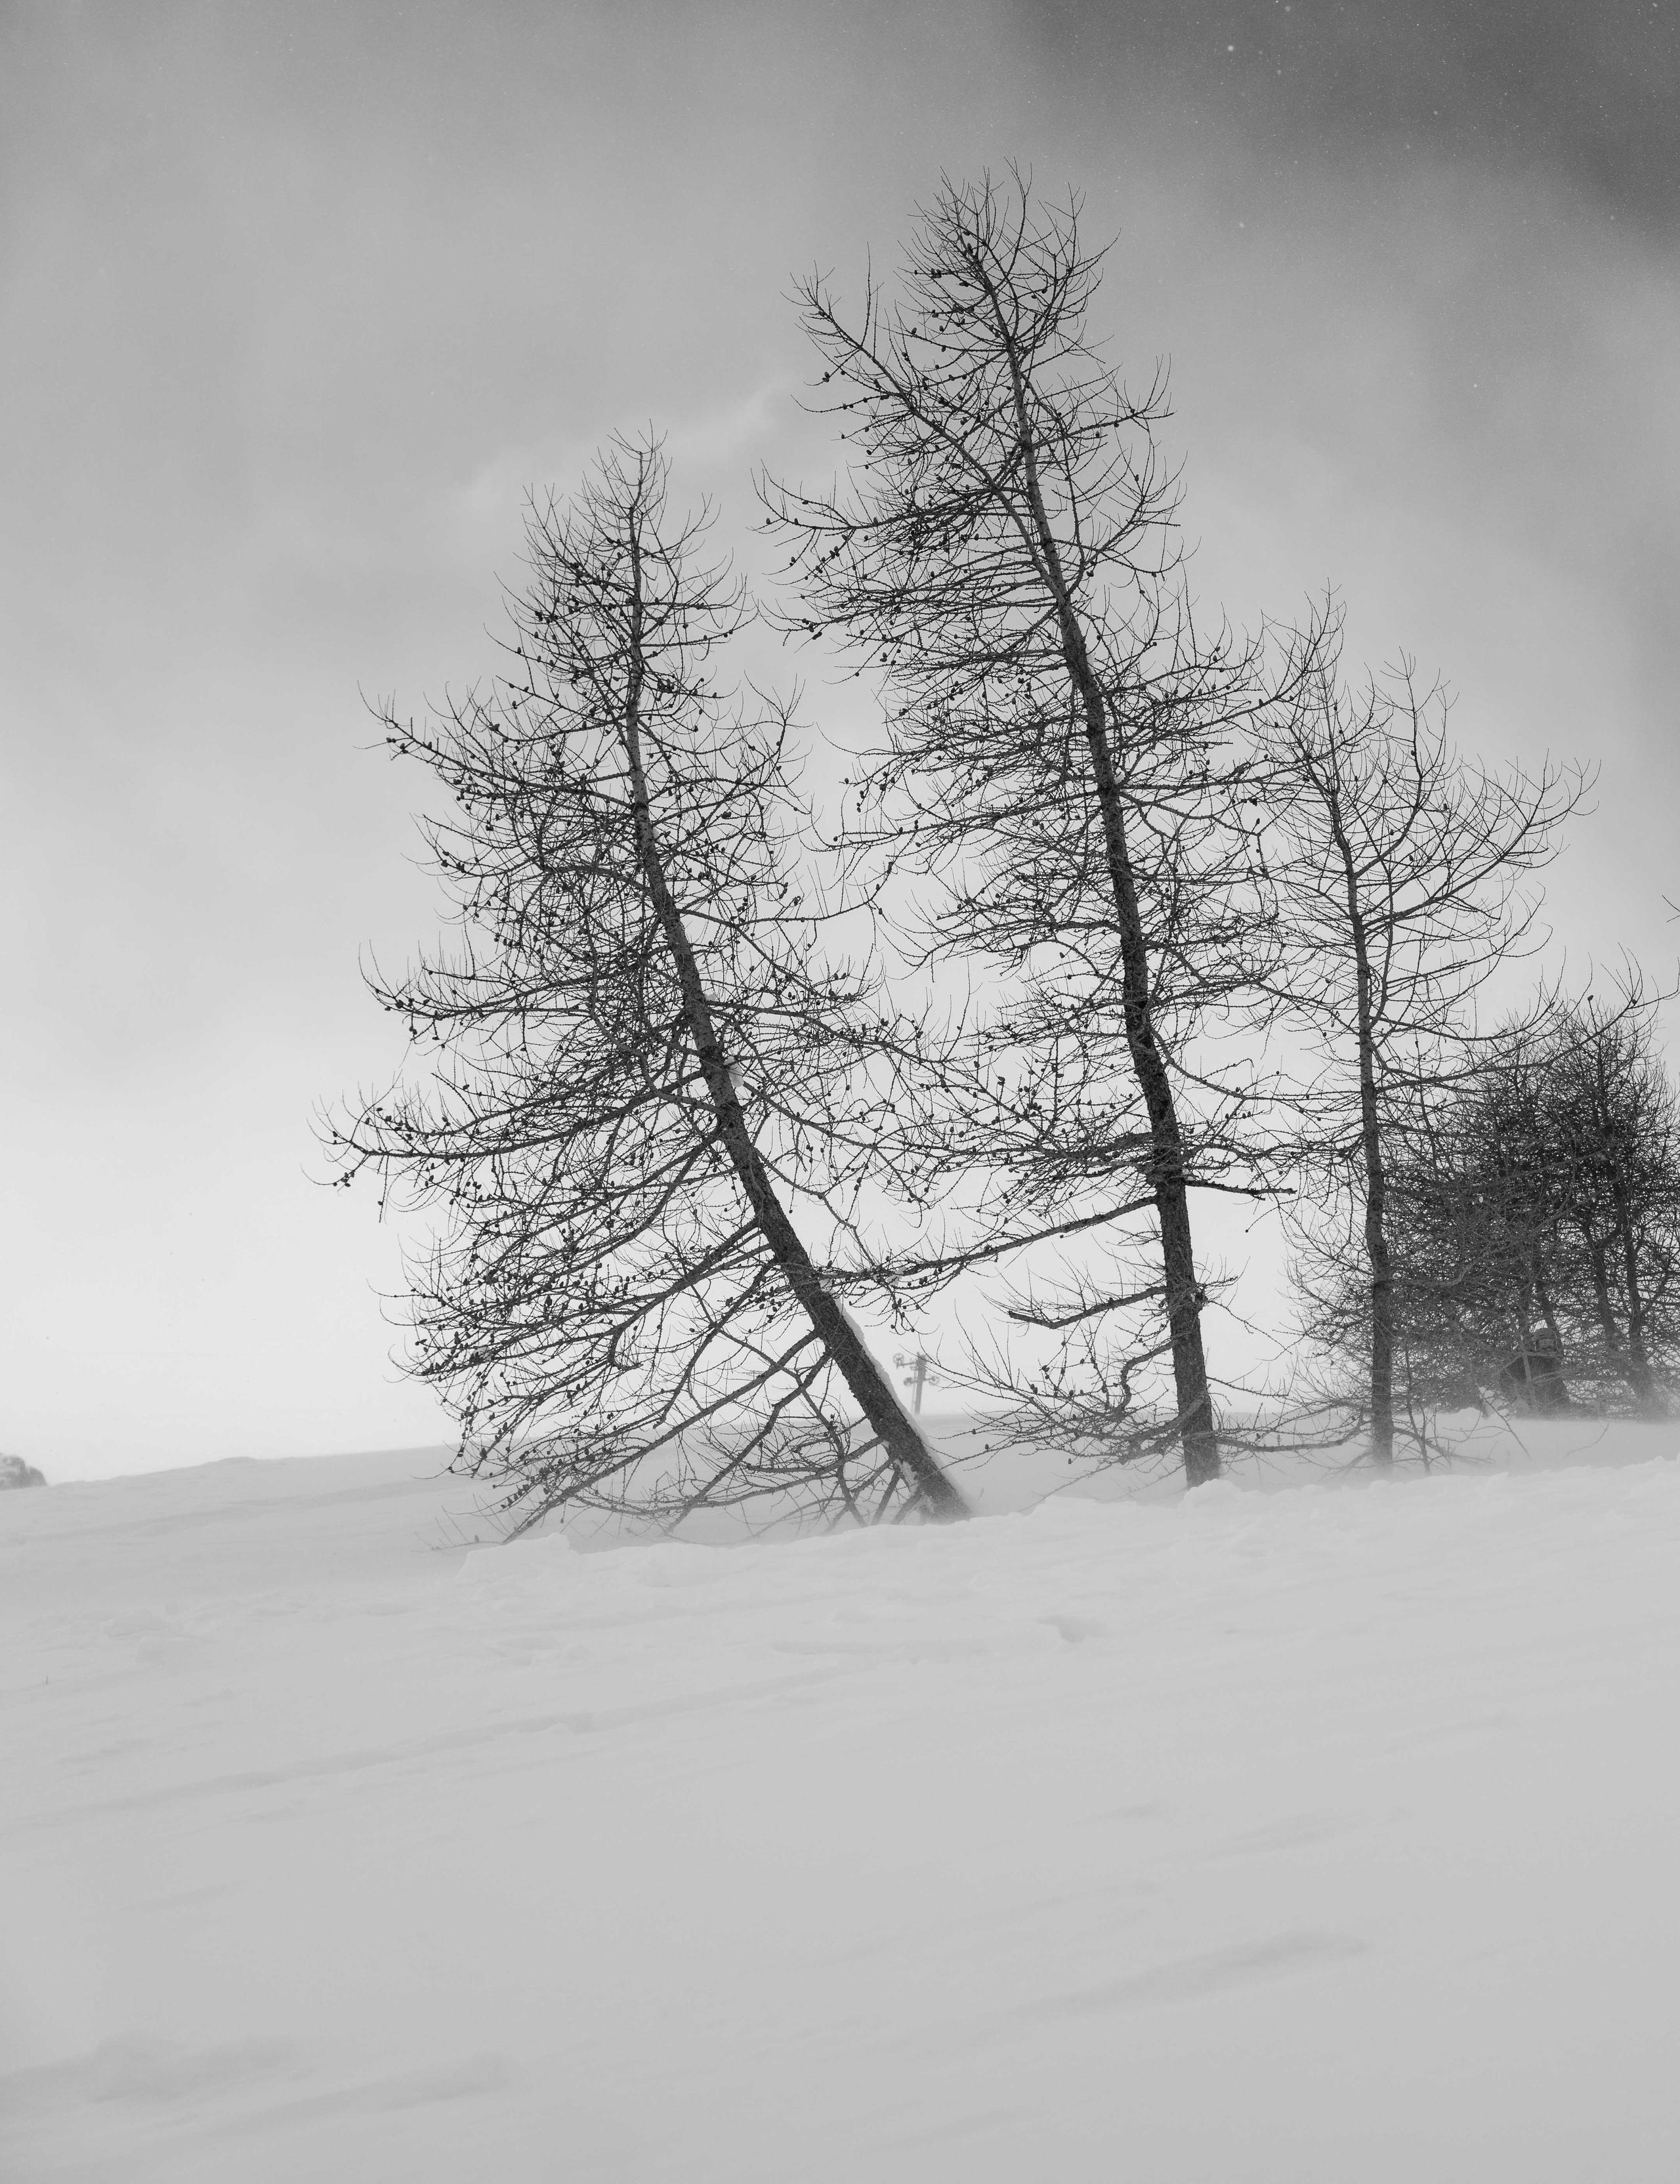 Trees in snowy mountain